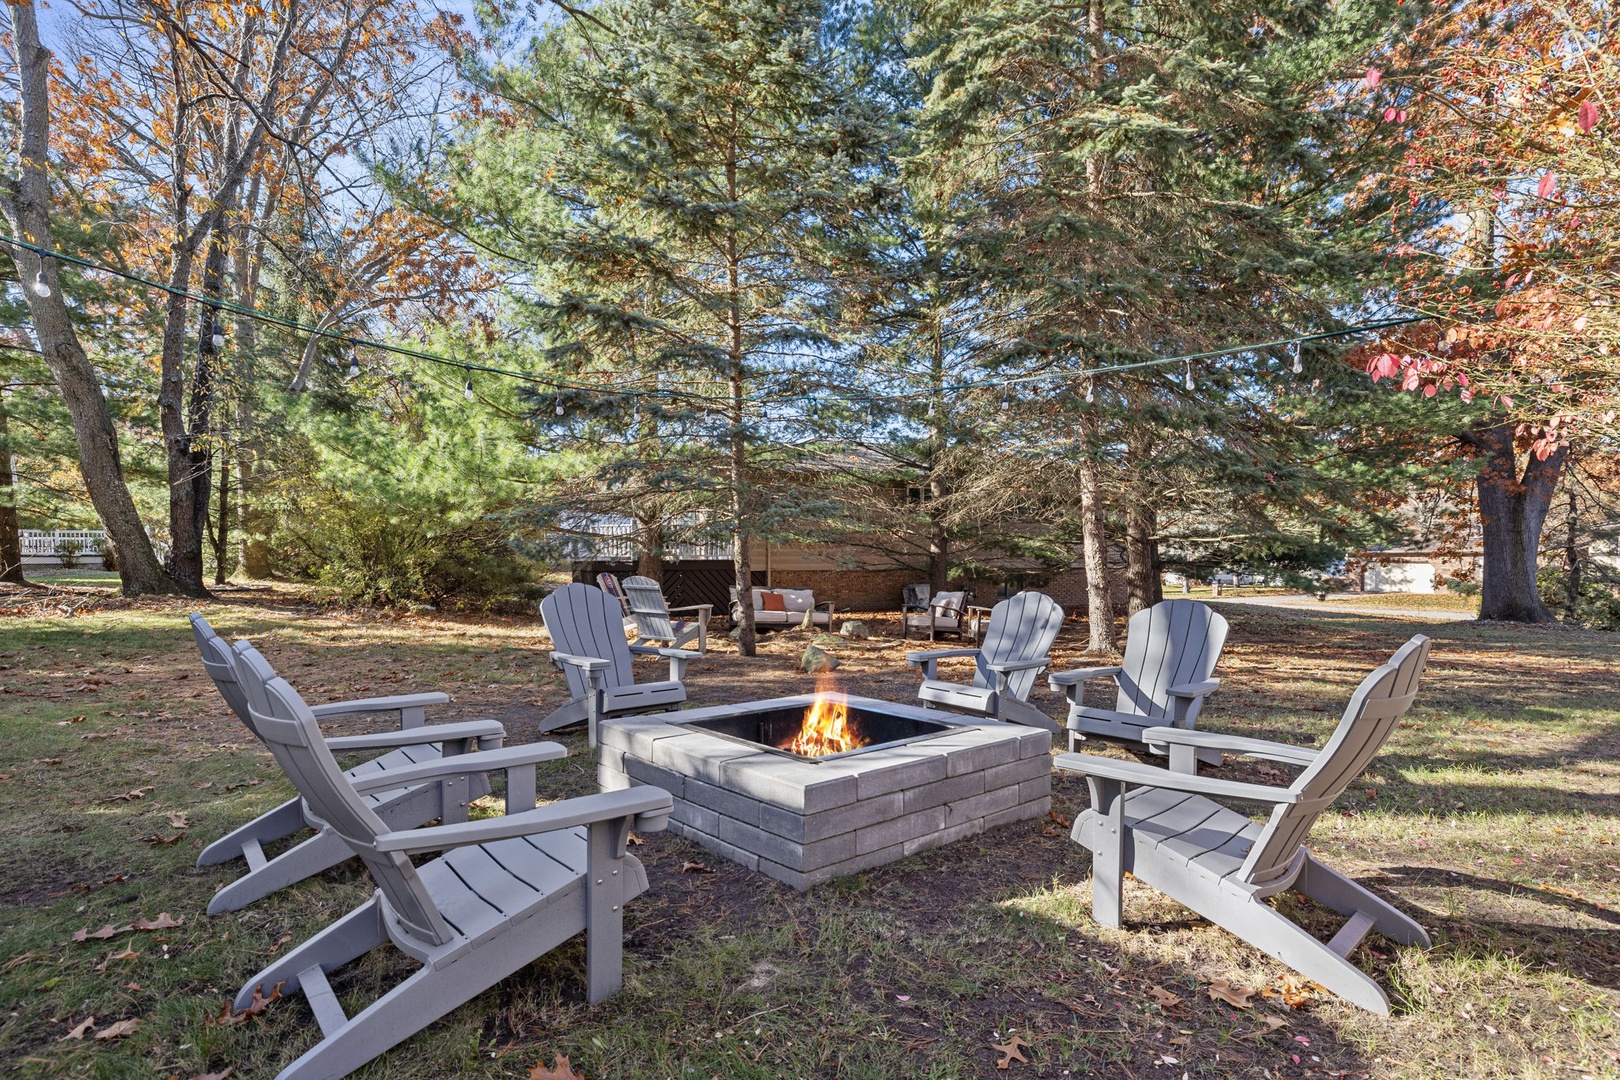 Sitting in an Adirondack chair around a firepit surrounded by tall trees… Priceless.